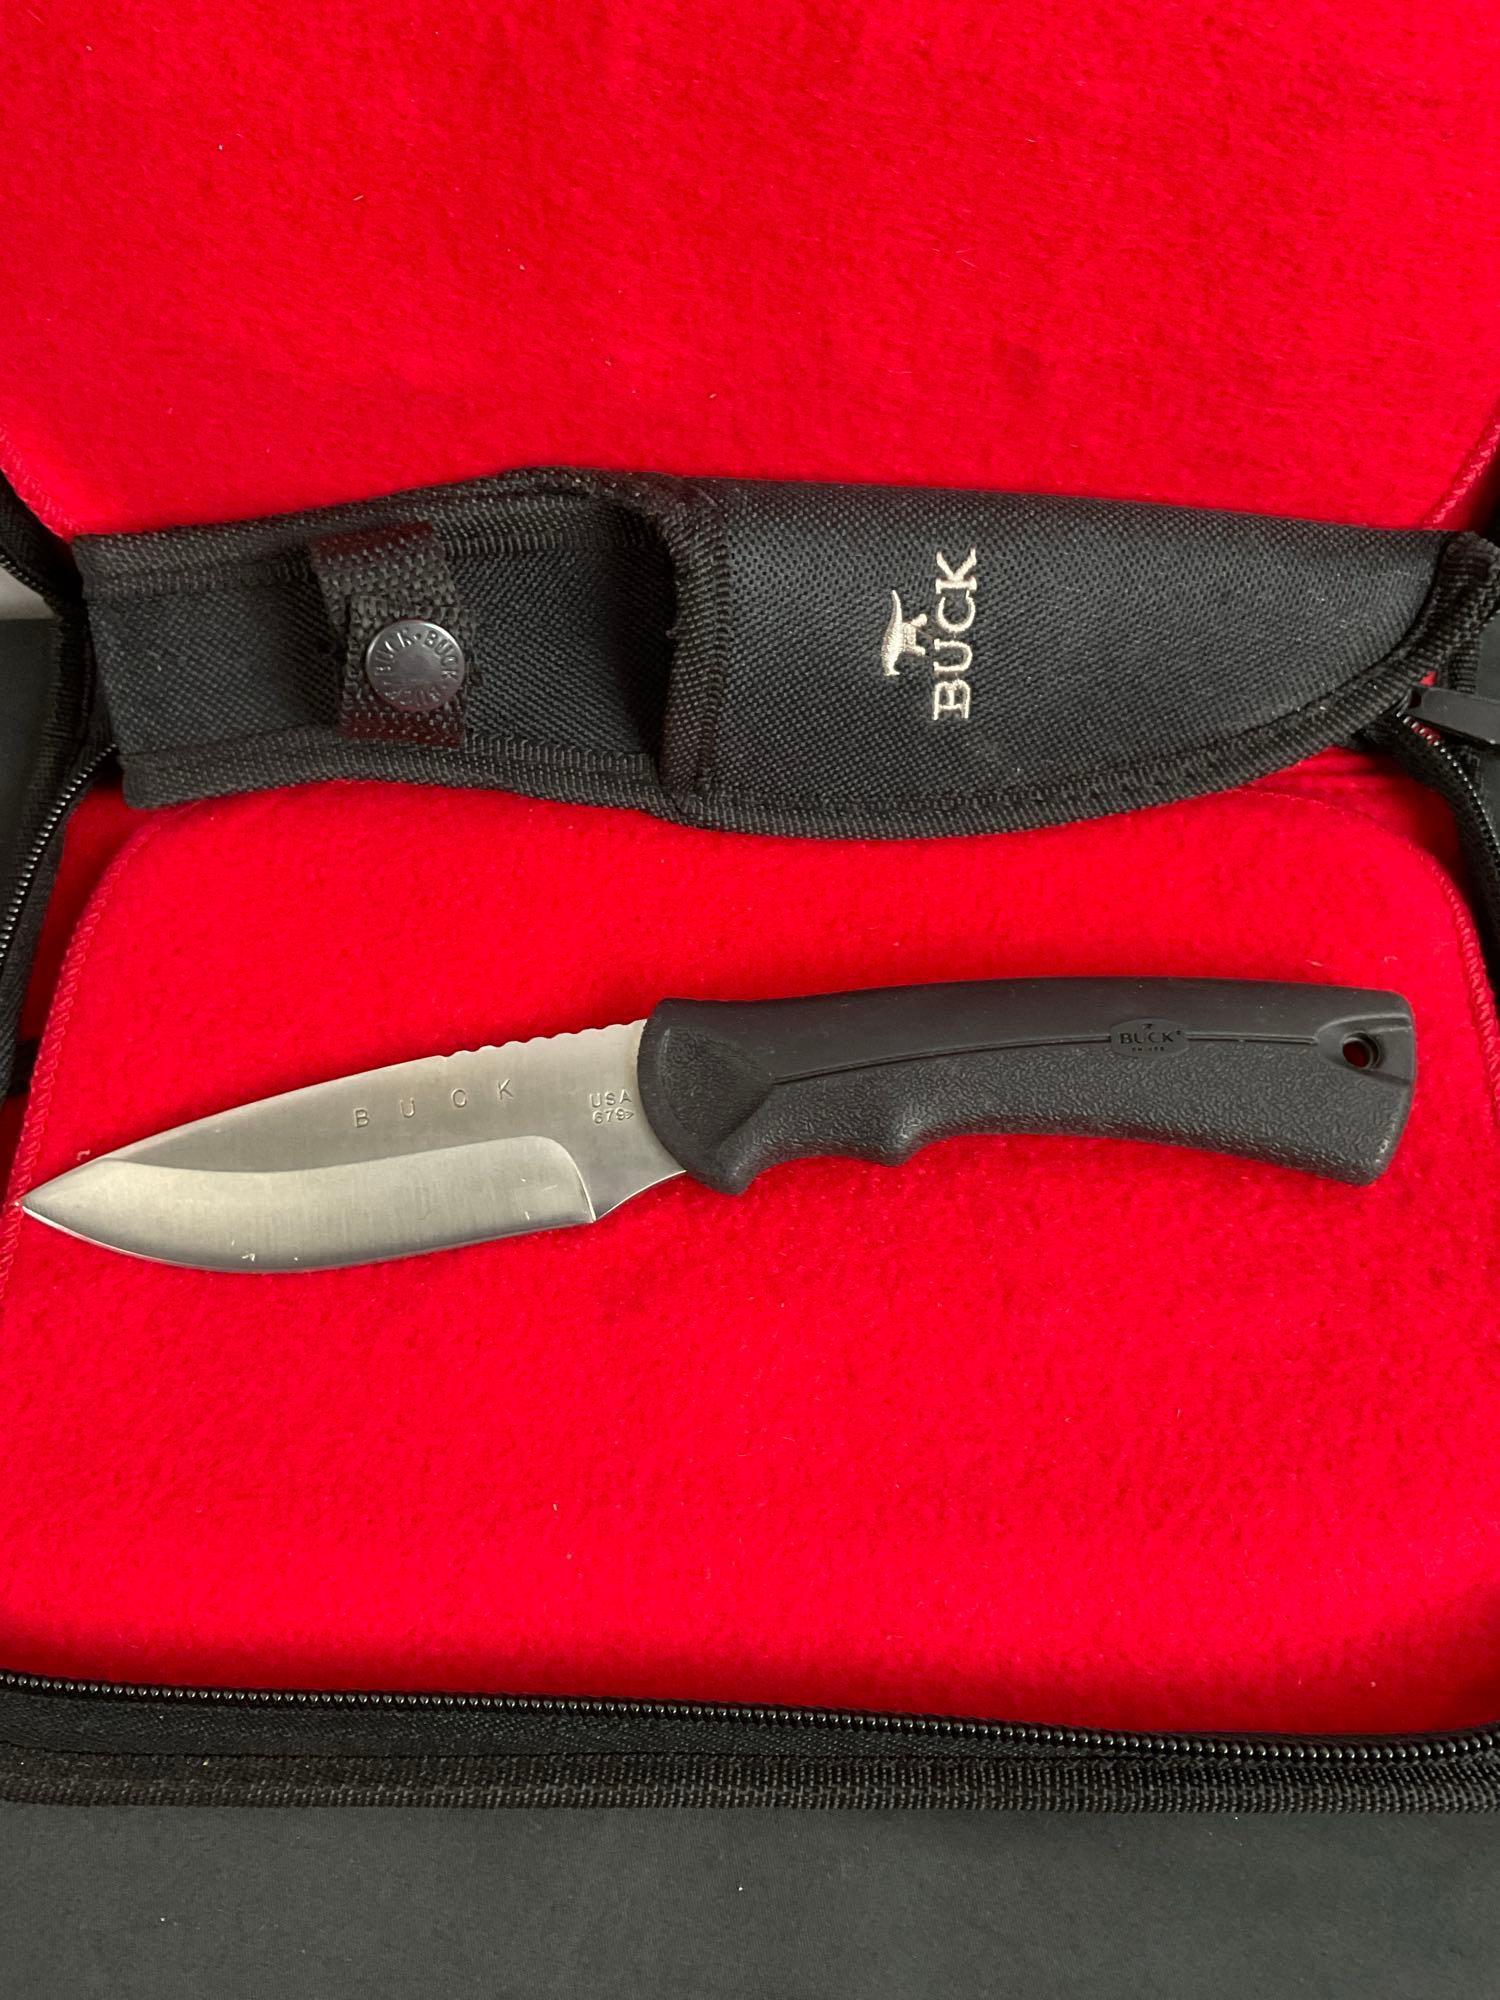 2x New In Box Buck Fixed Blade Knives in Sheathes - Numbered CSAR T 680 & 679 - See pics